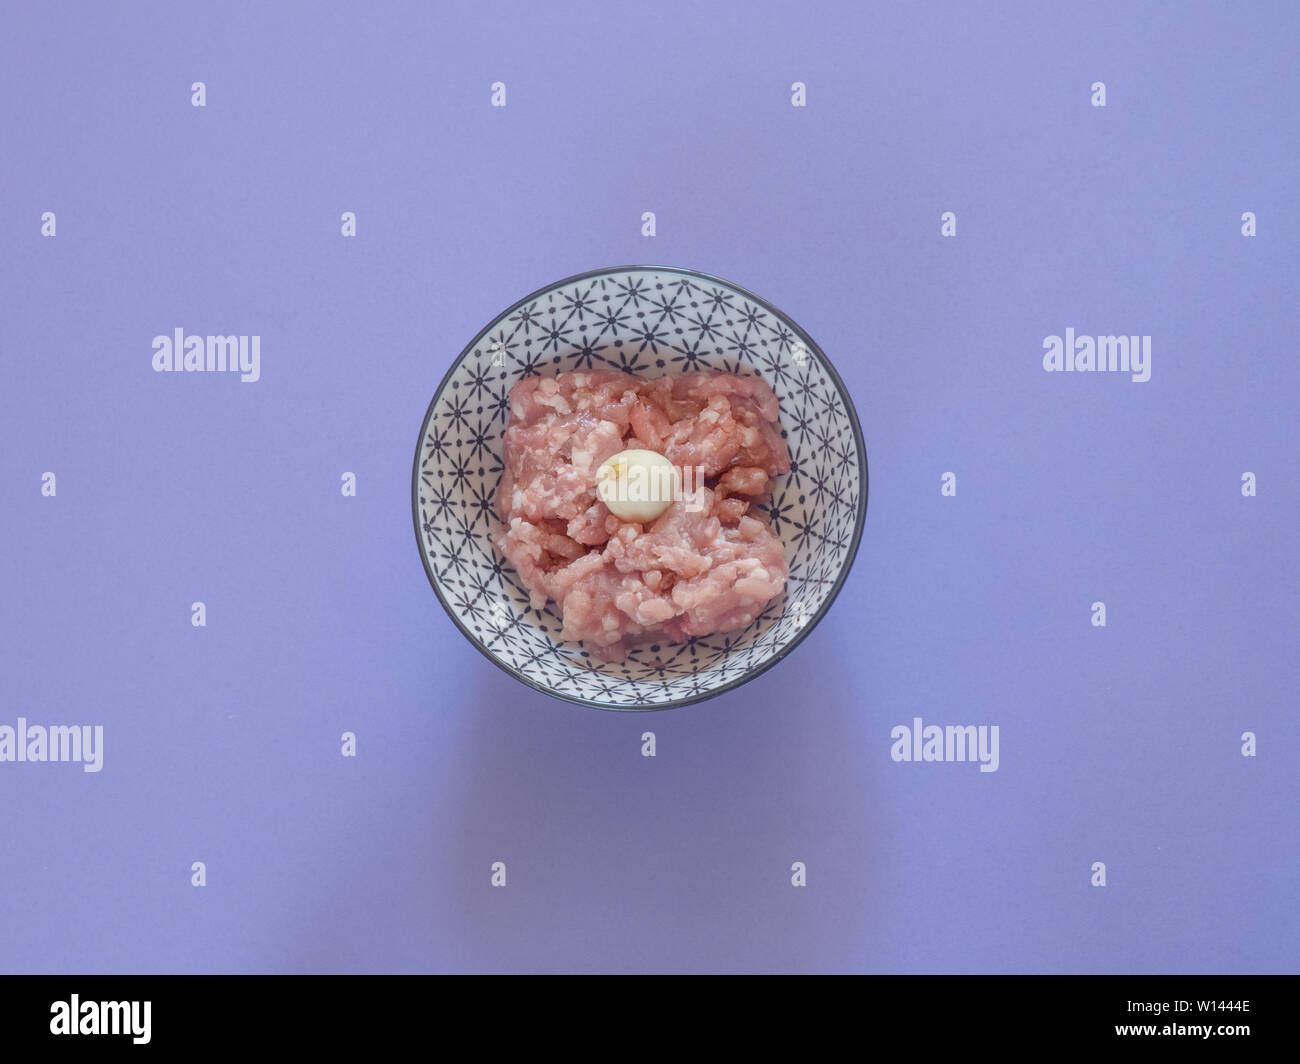 Minced pork meat in a bowl on purple background Stock Photo